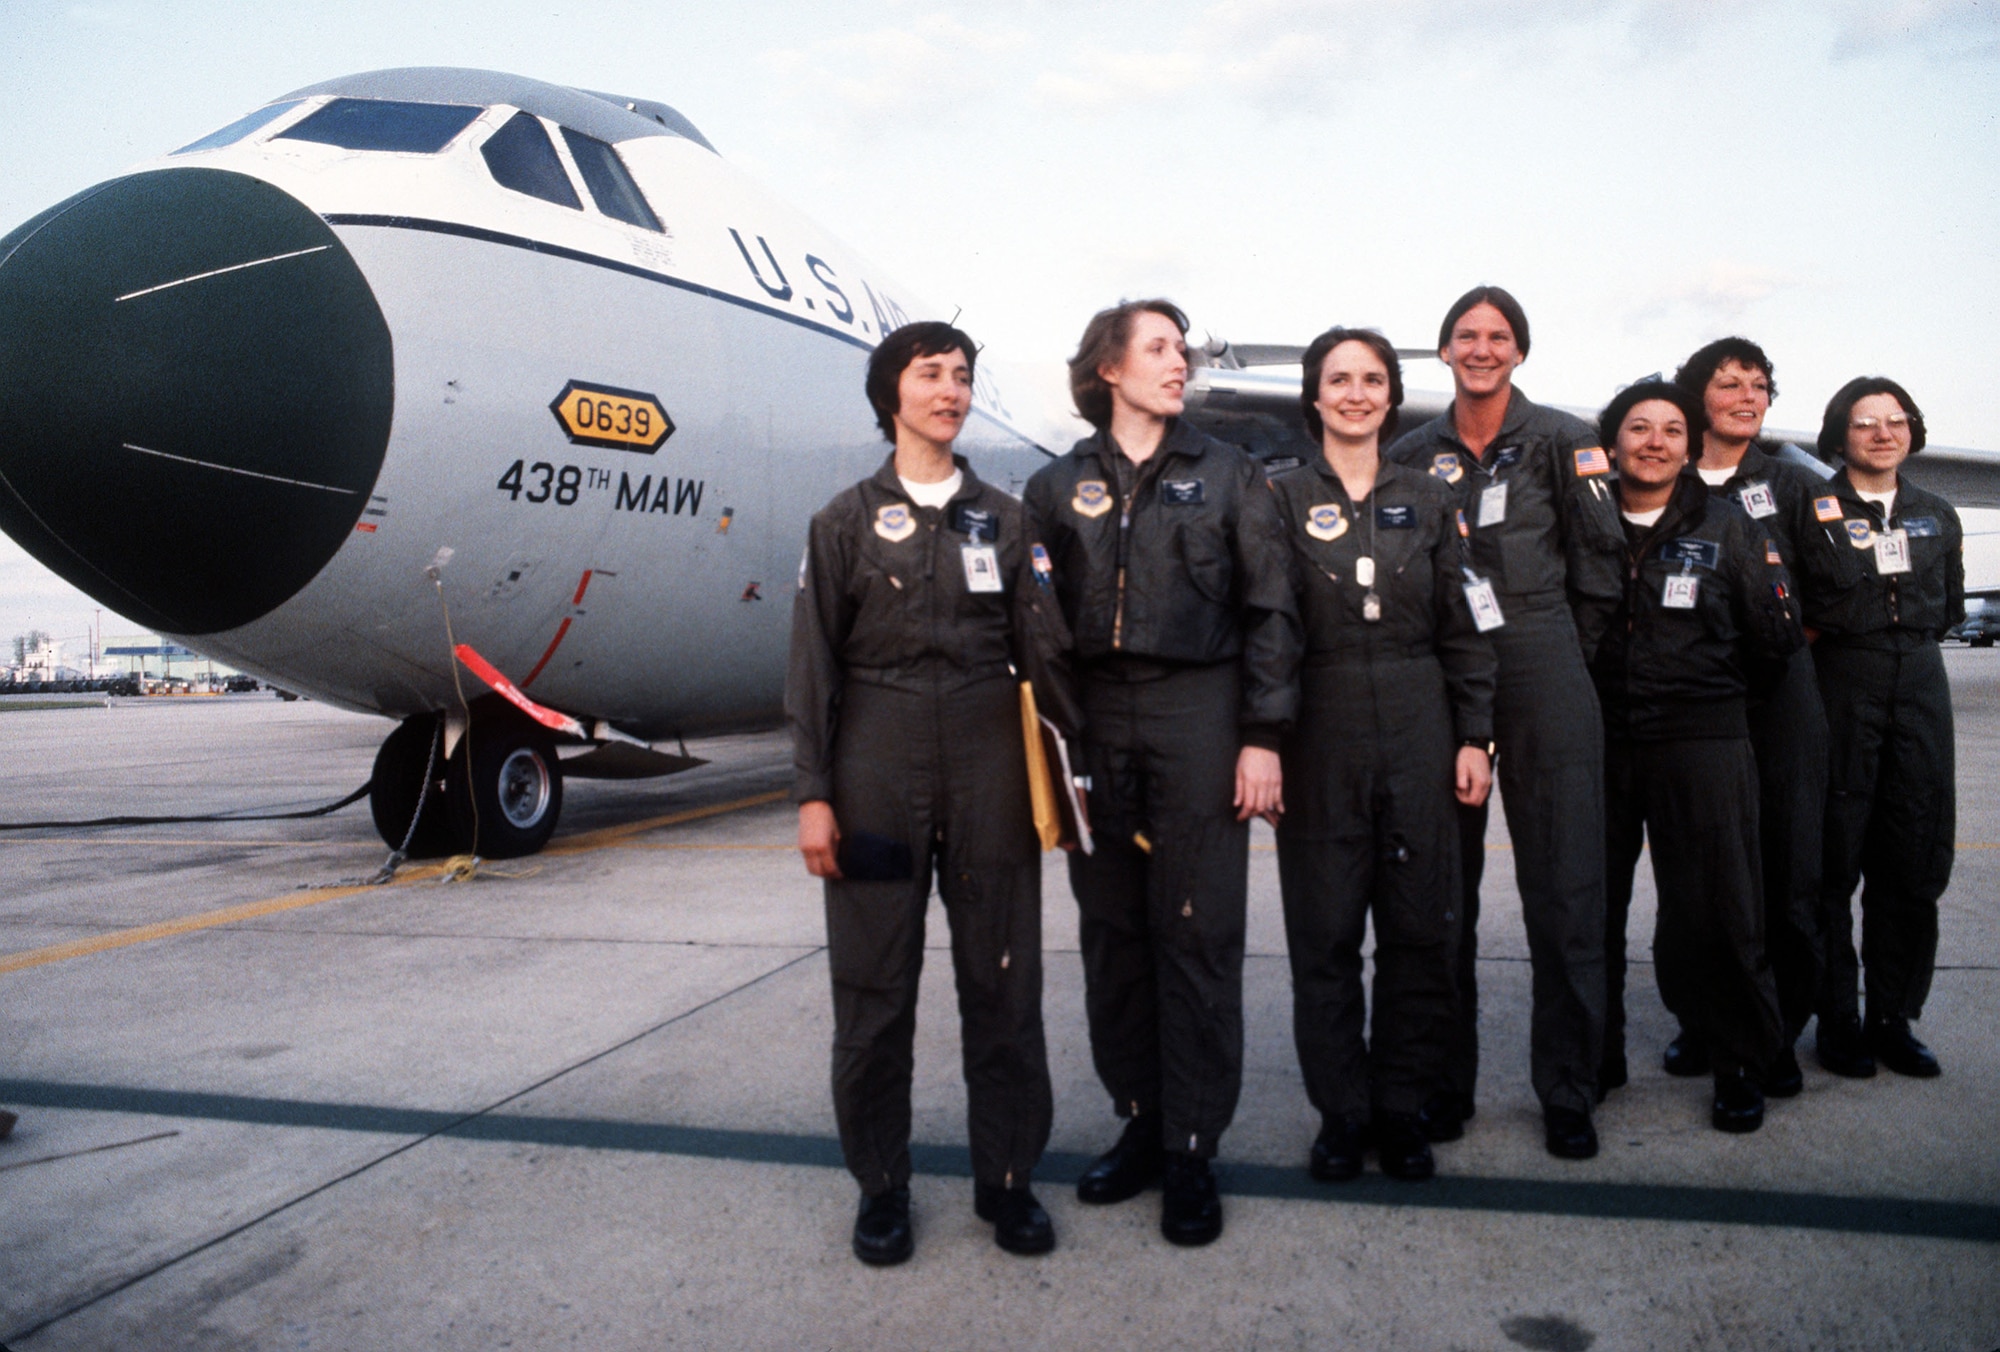 Picture of  7 seven in flight suits standing in front of a C-141.